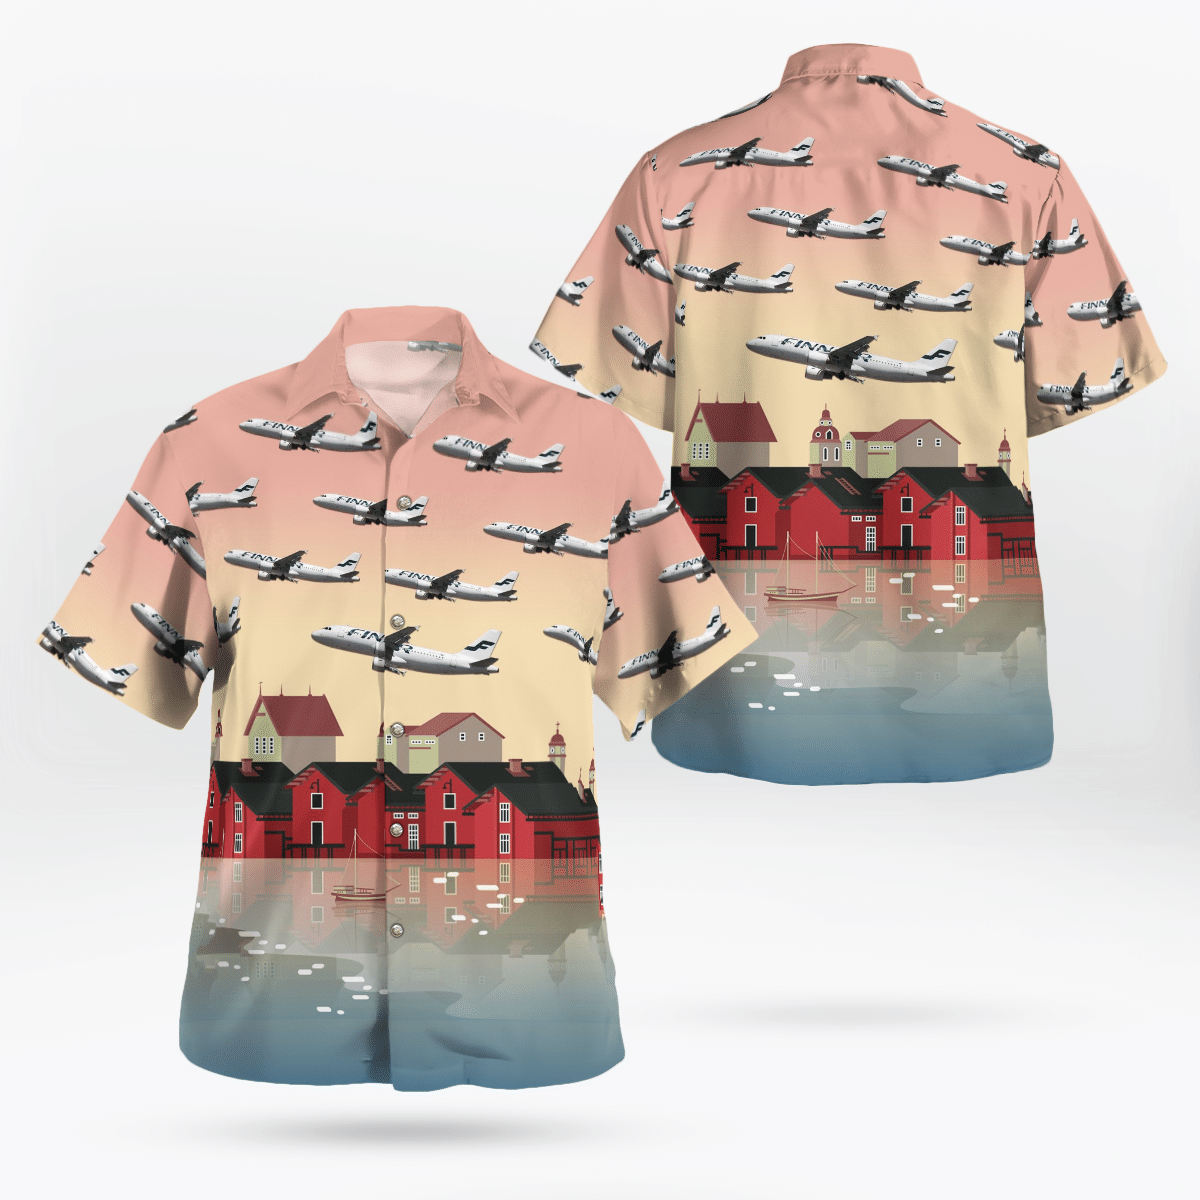 If you're a fan of Hawaiian Shirt, you can choose one in our store 108